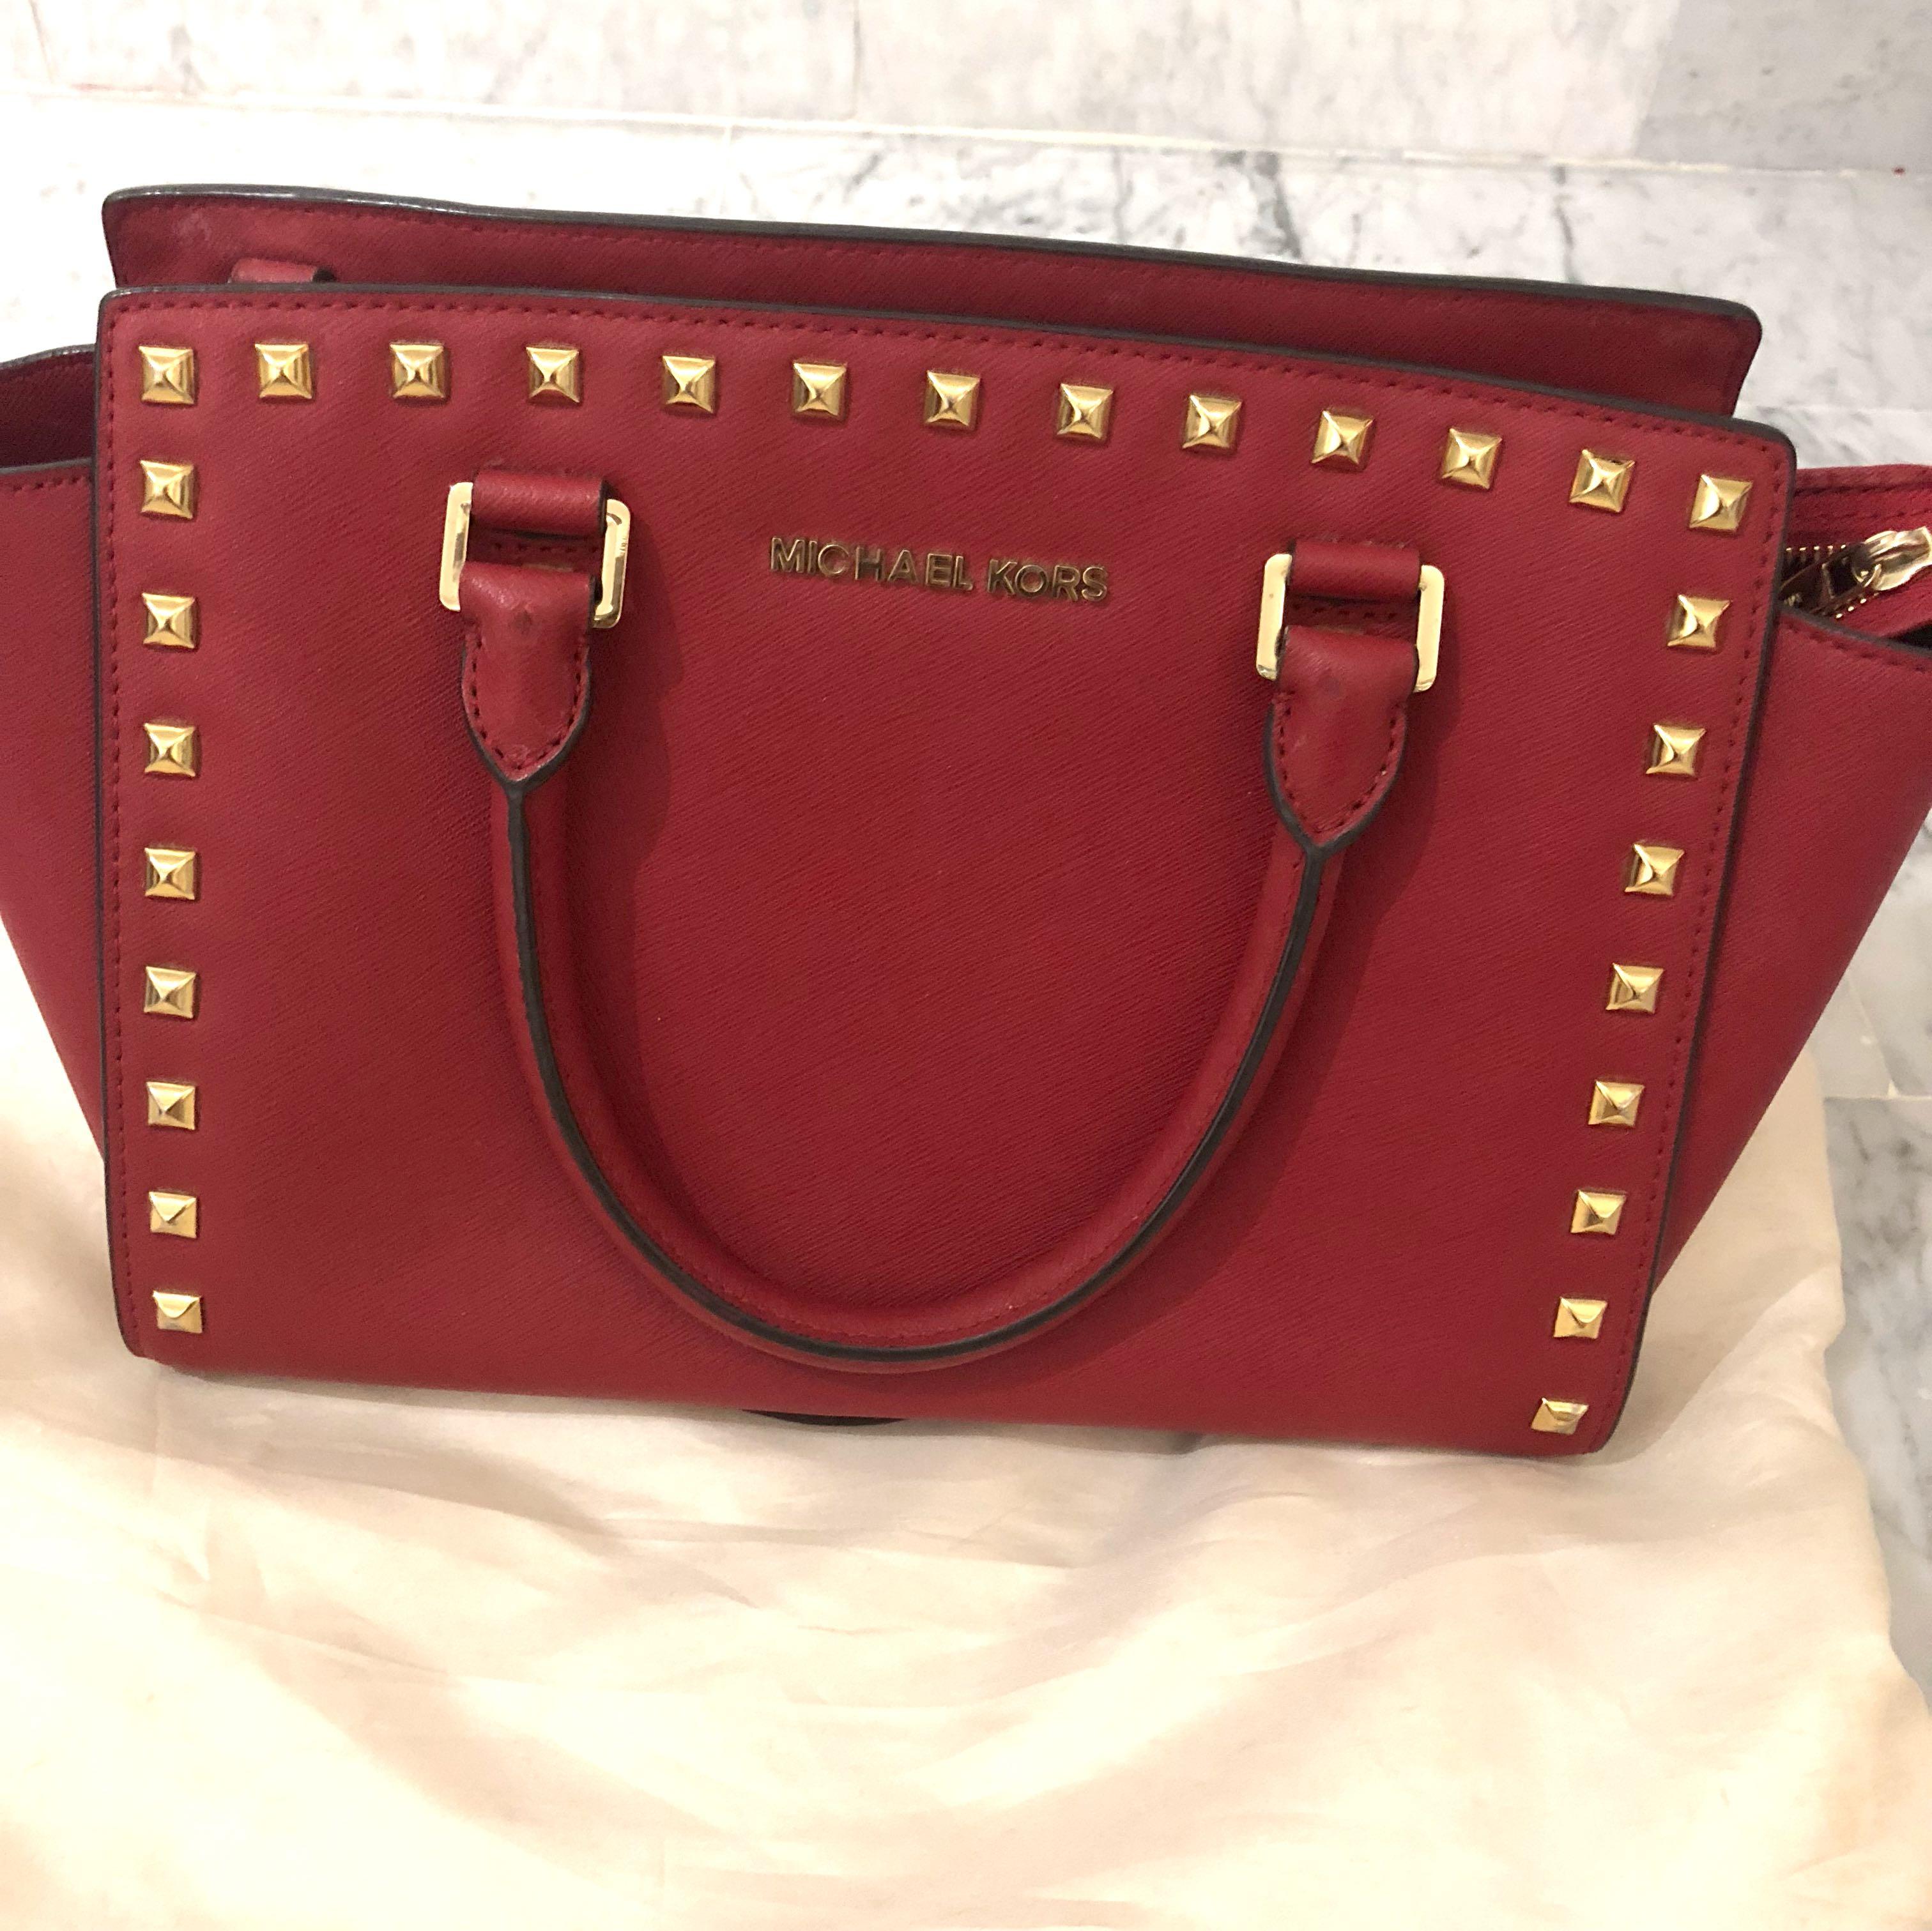 michael kors bags and prices